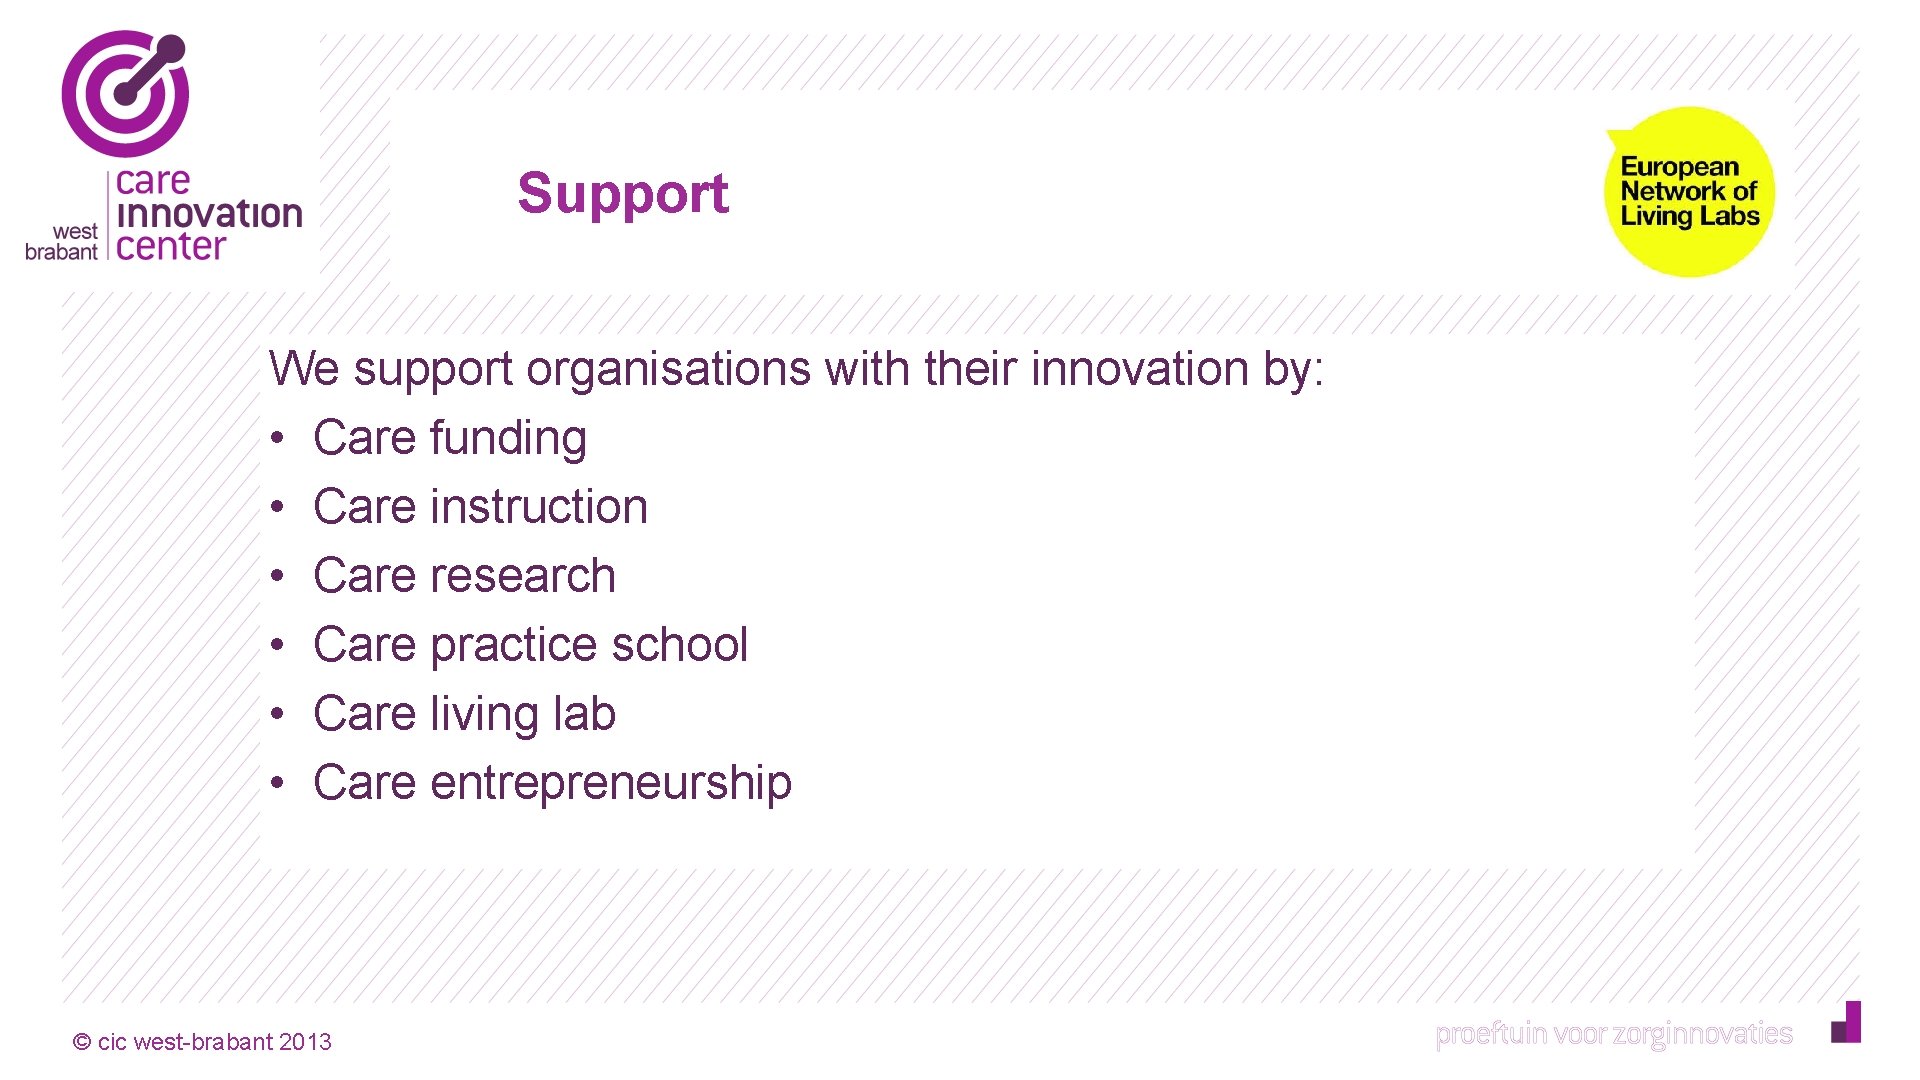 Support We support organisations with their innovation by: • Care funding • Care instruction